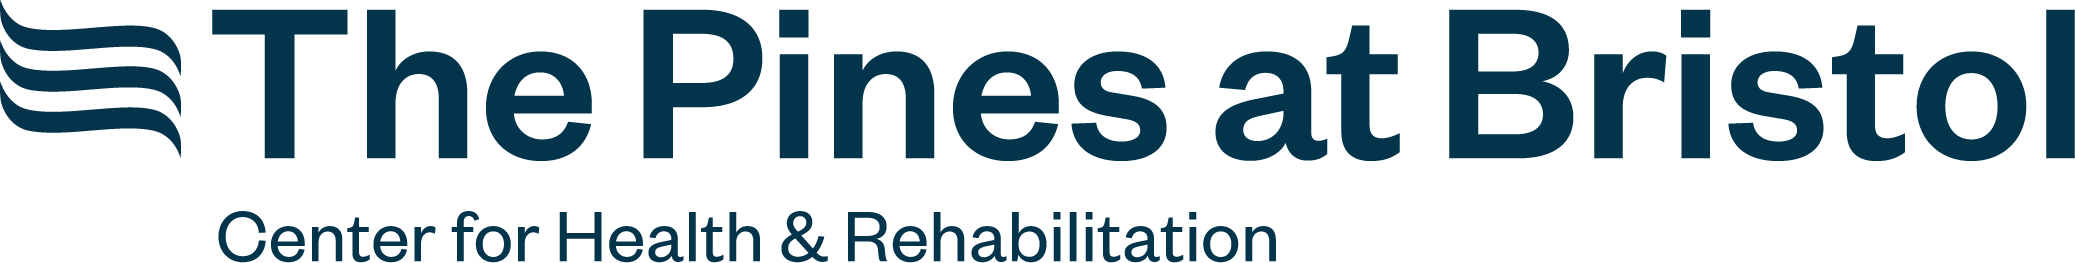 The Pines at Bristol Center for Health and Rehabilitation